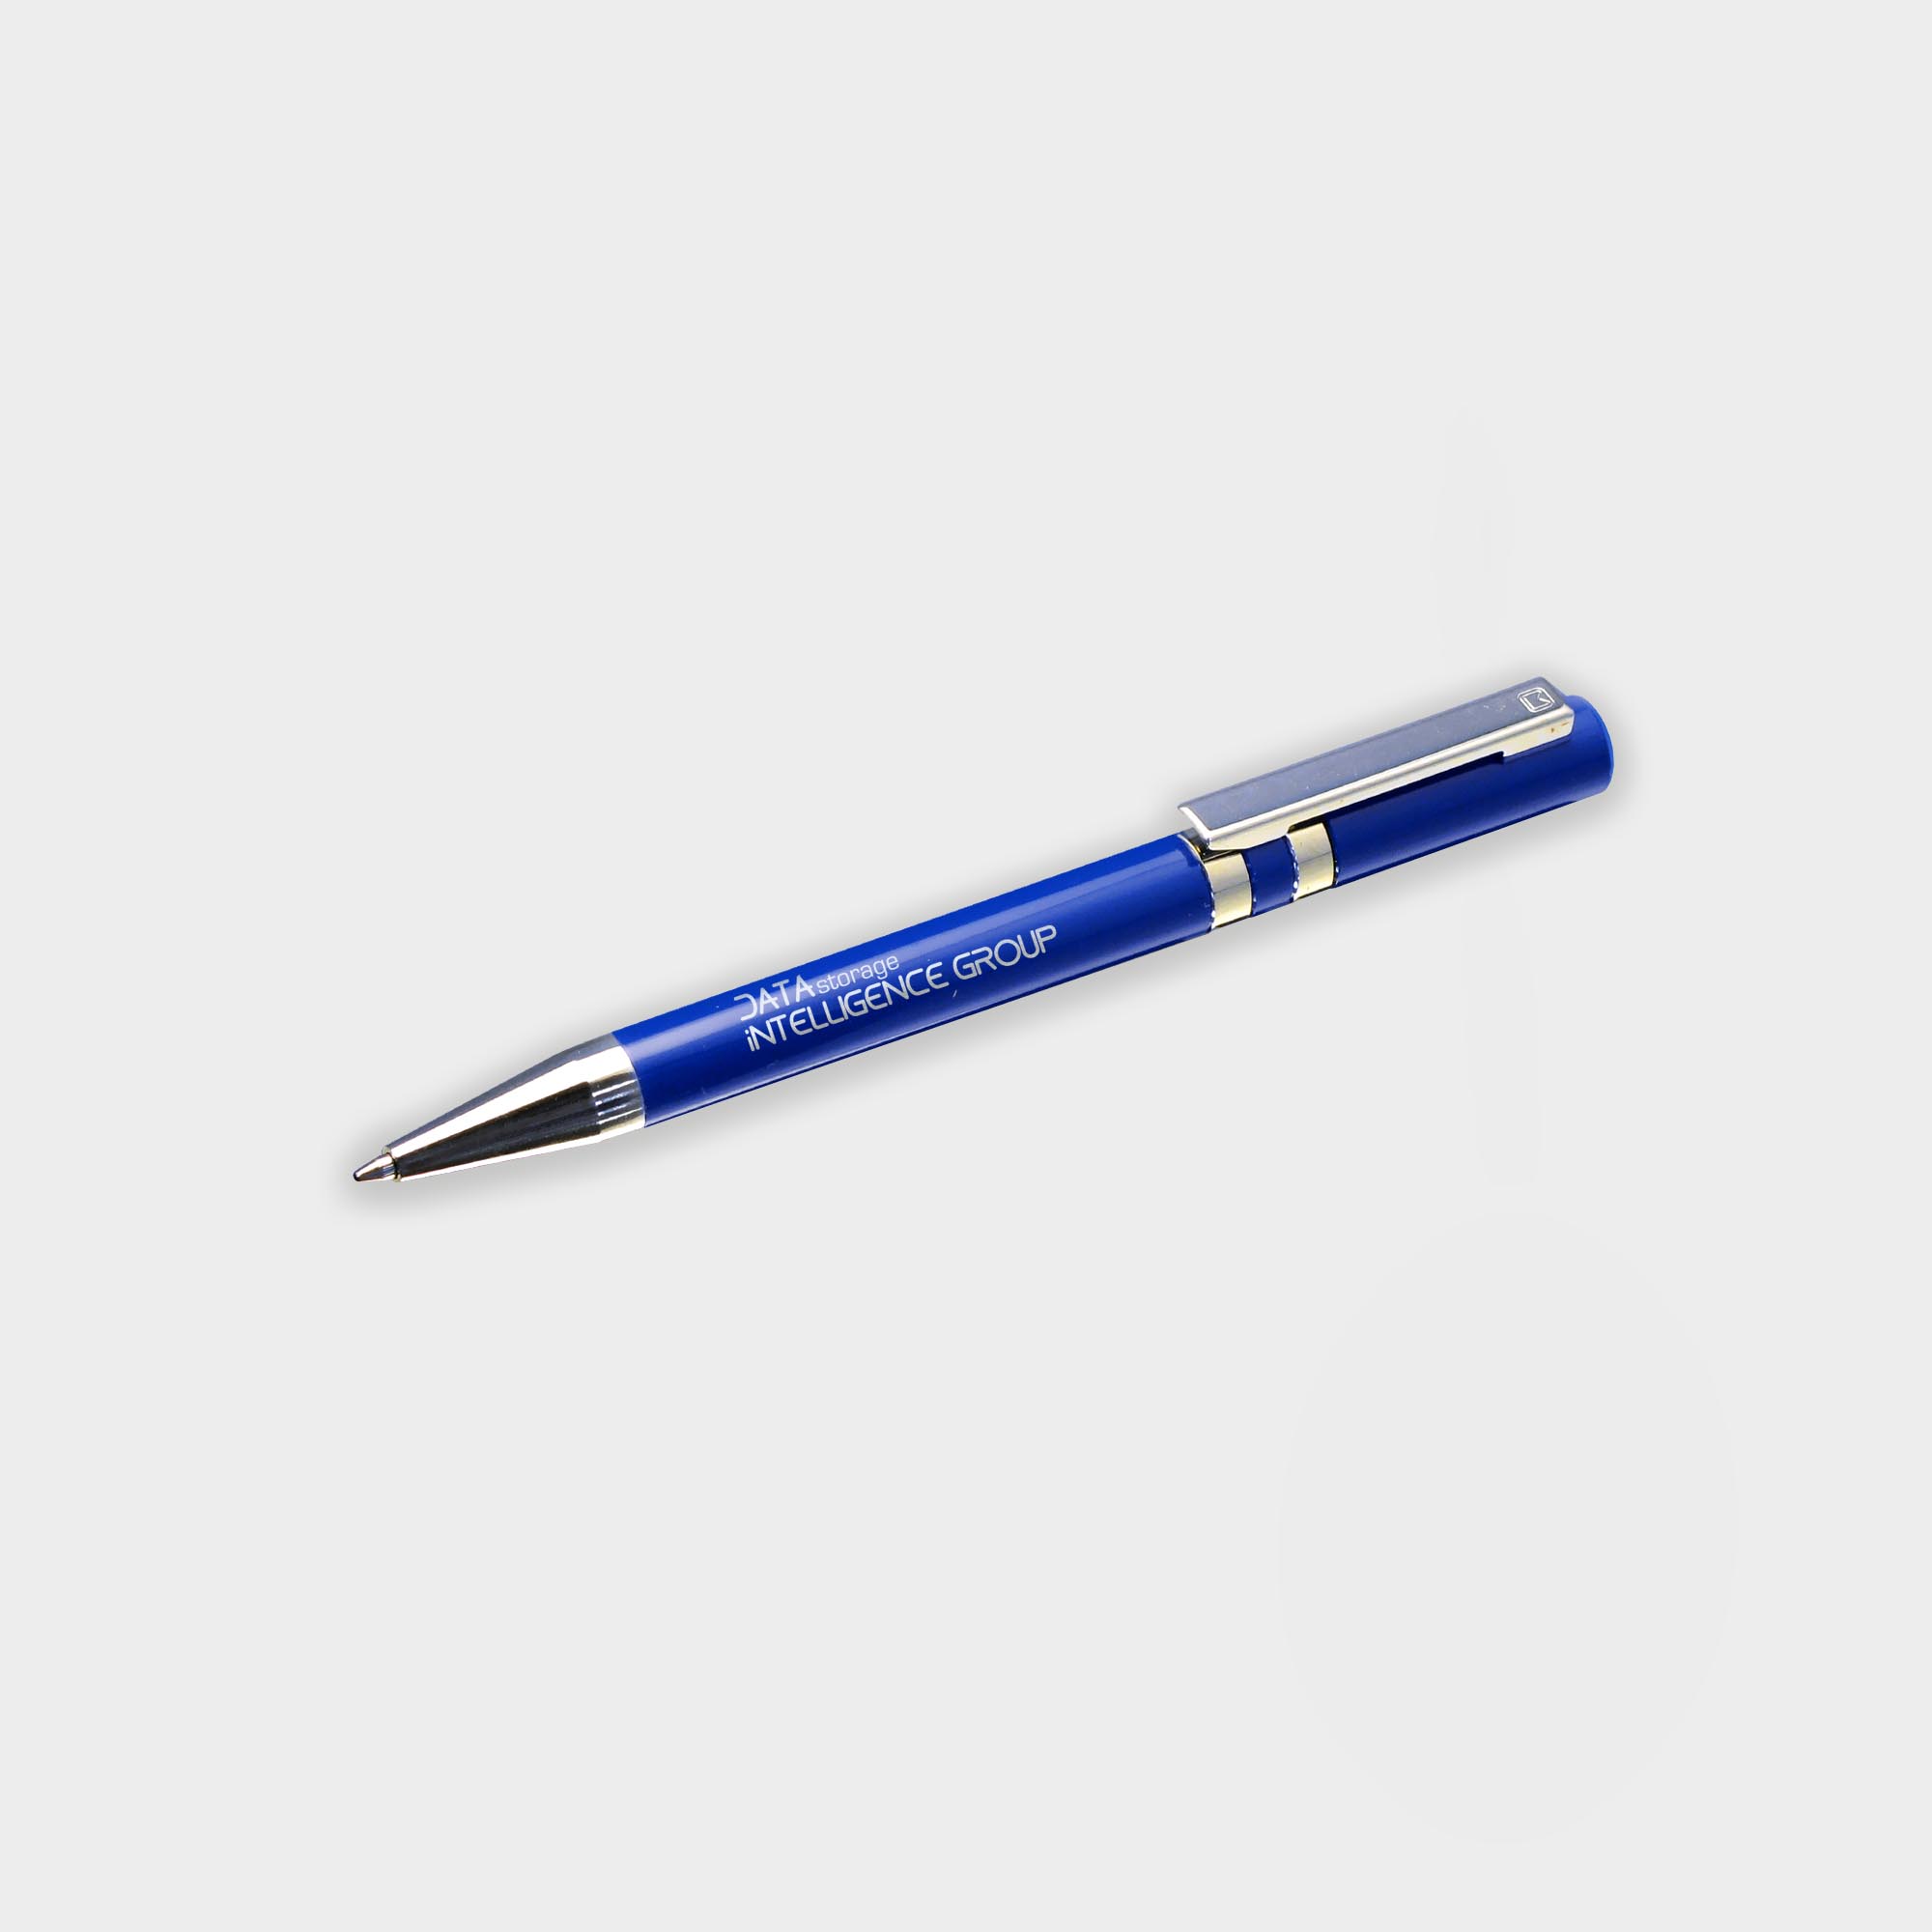 The Green & Good Ethic Pen made from recycled plastic. Stylish executive pen with chrome tip and various colour upon request. Black ink as standard. Blue / Silver